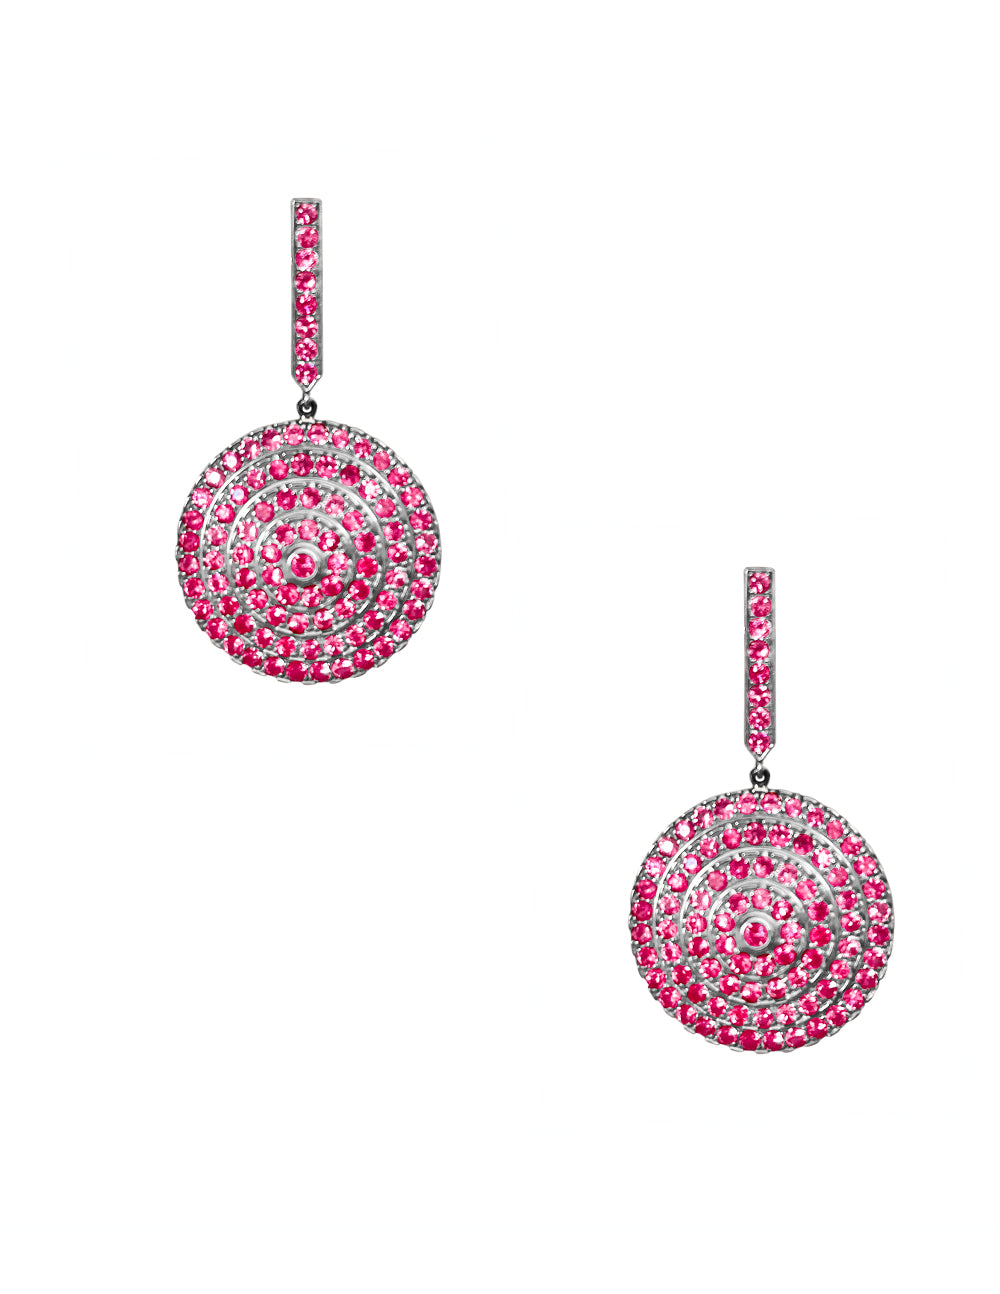 Soleil Silver Earrings with Pink Sapphire